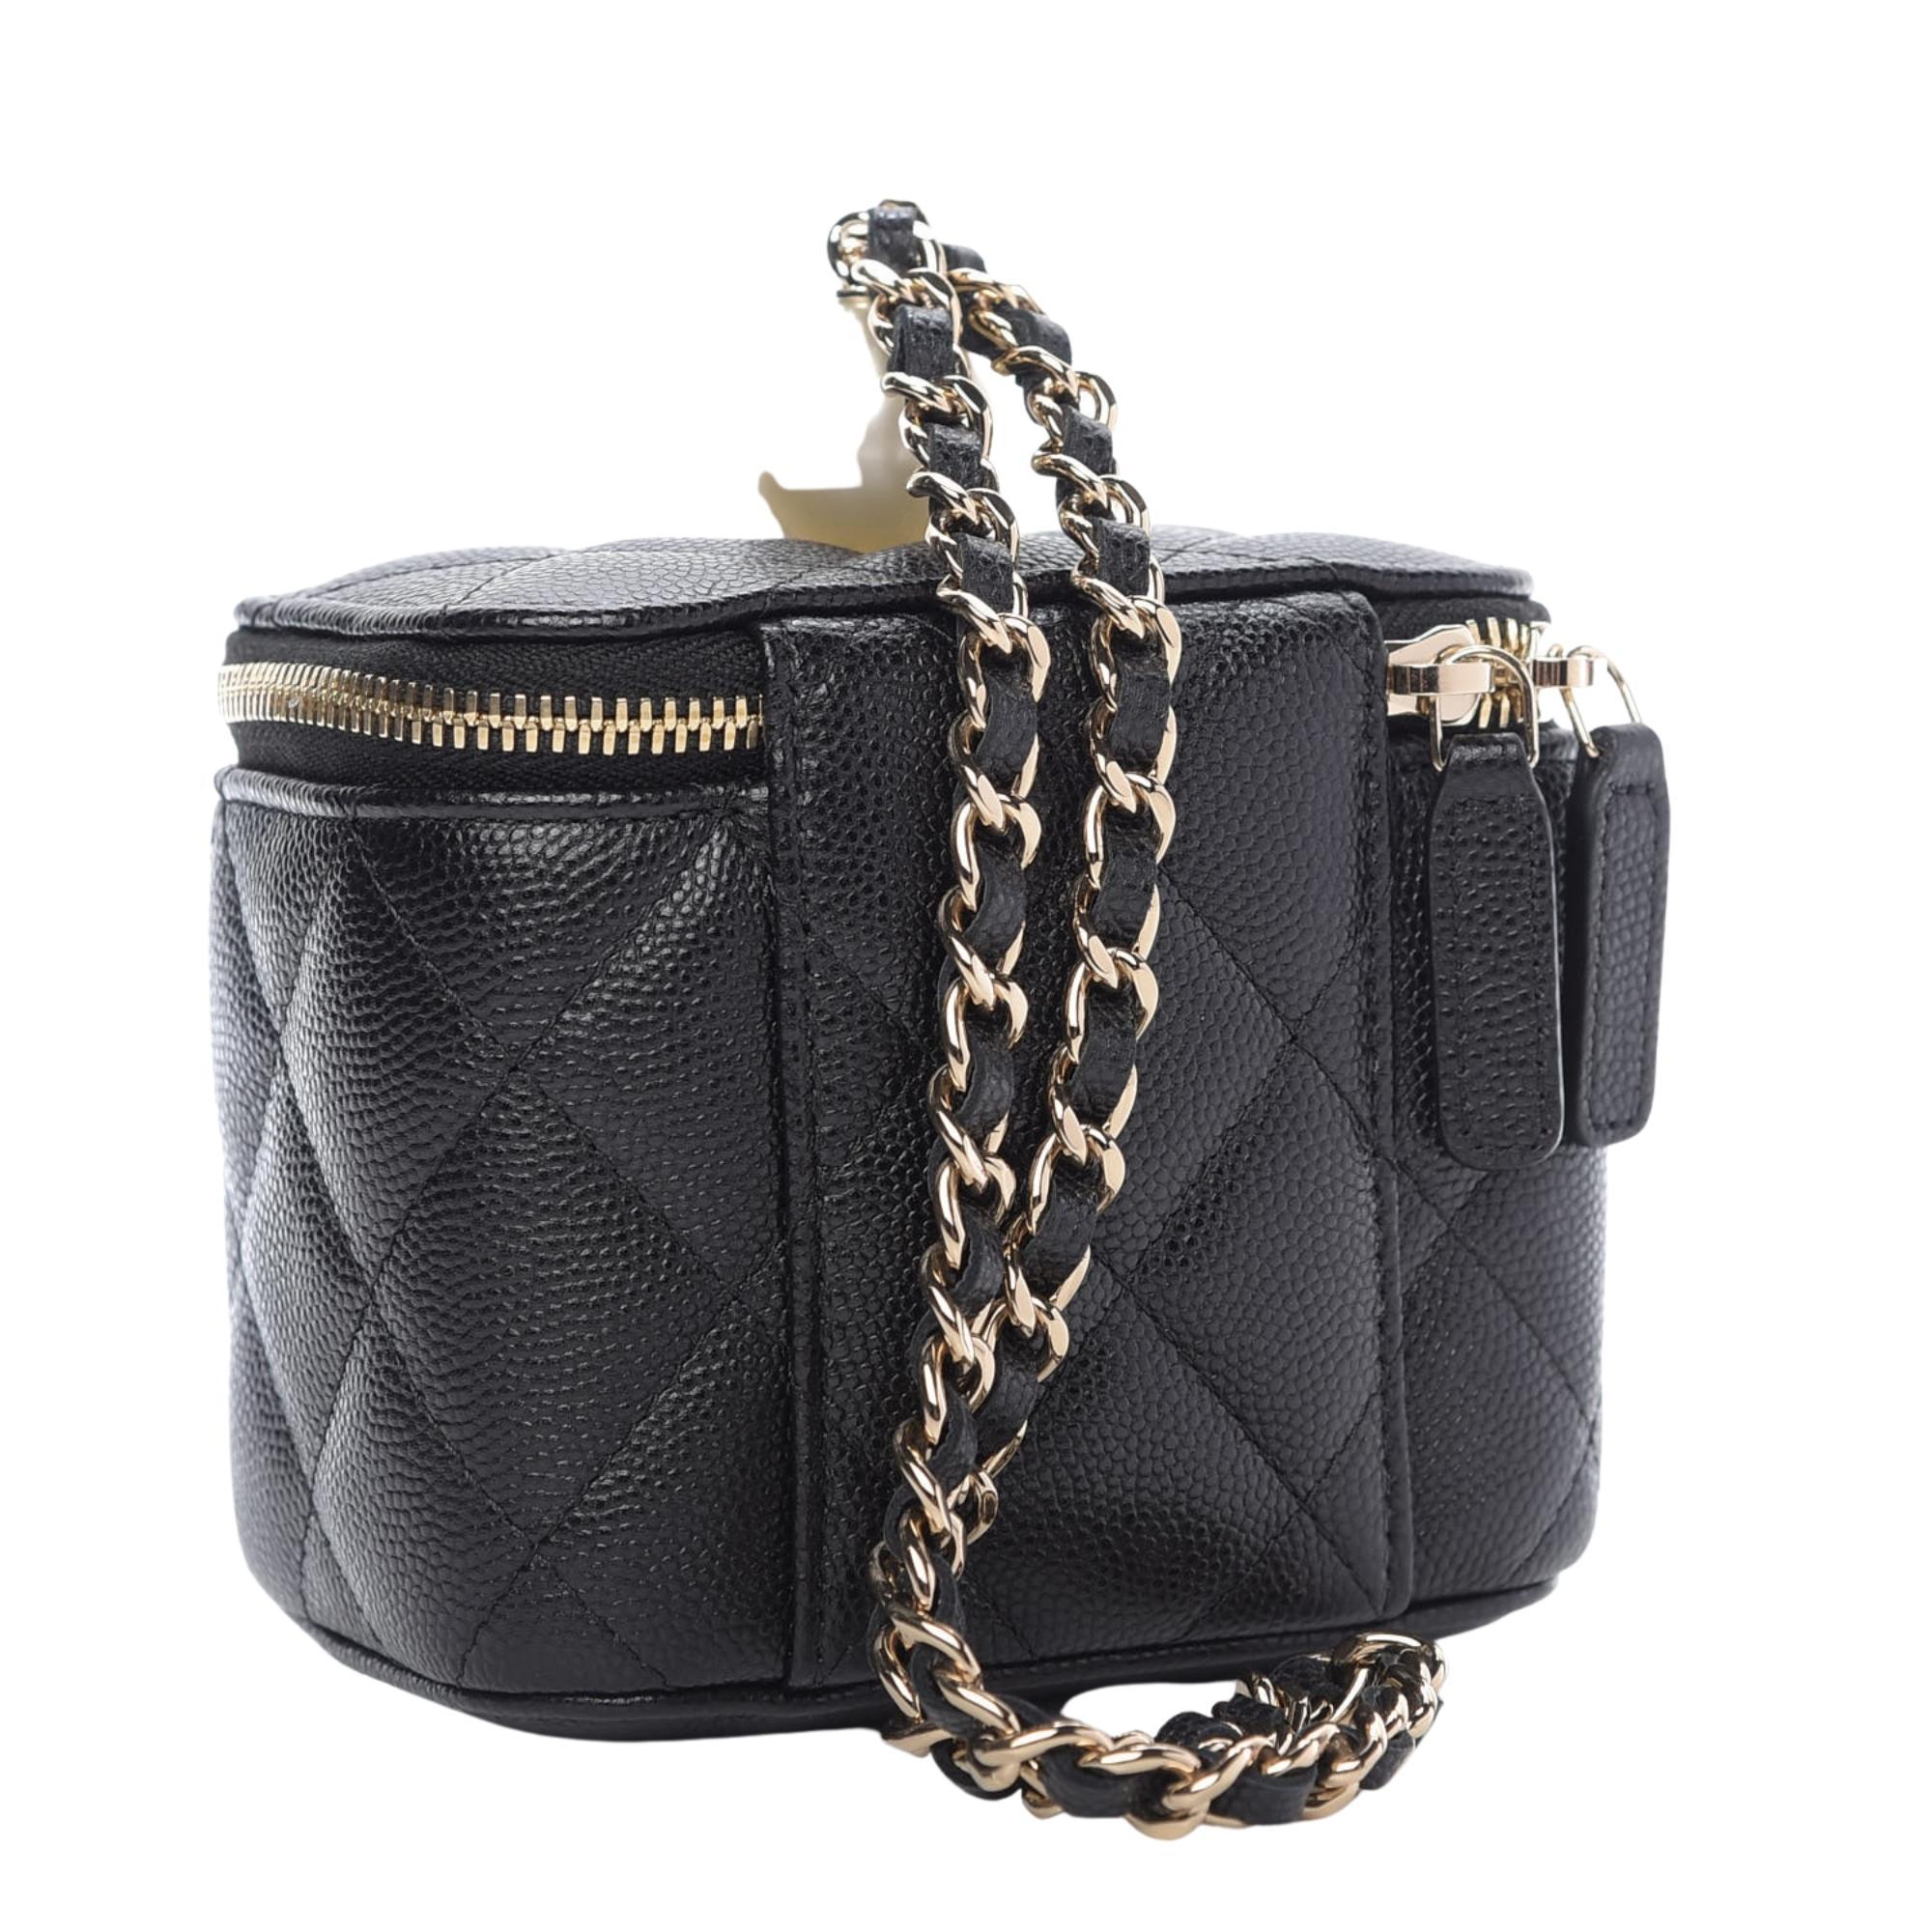 This mini vanity case is made of luxurious caviar leather in black. The bag features a gold chain-link interlaced with leather strap, gold hardware, a resin pearl at top and a 3/4 wrap-around zipper that opens to a black fabric interior. Chanel bags